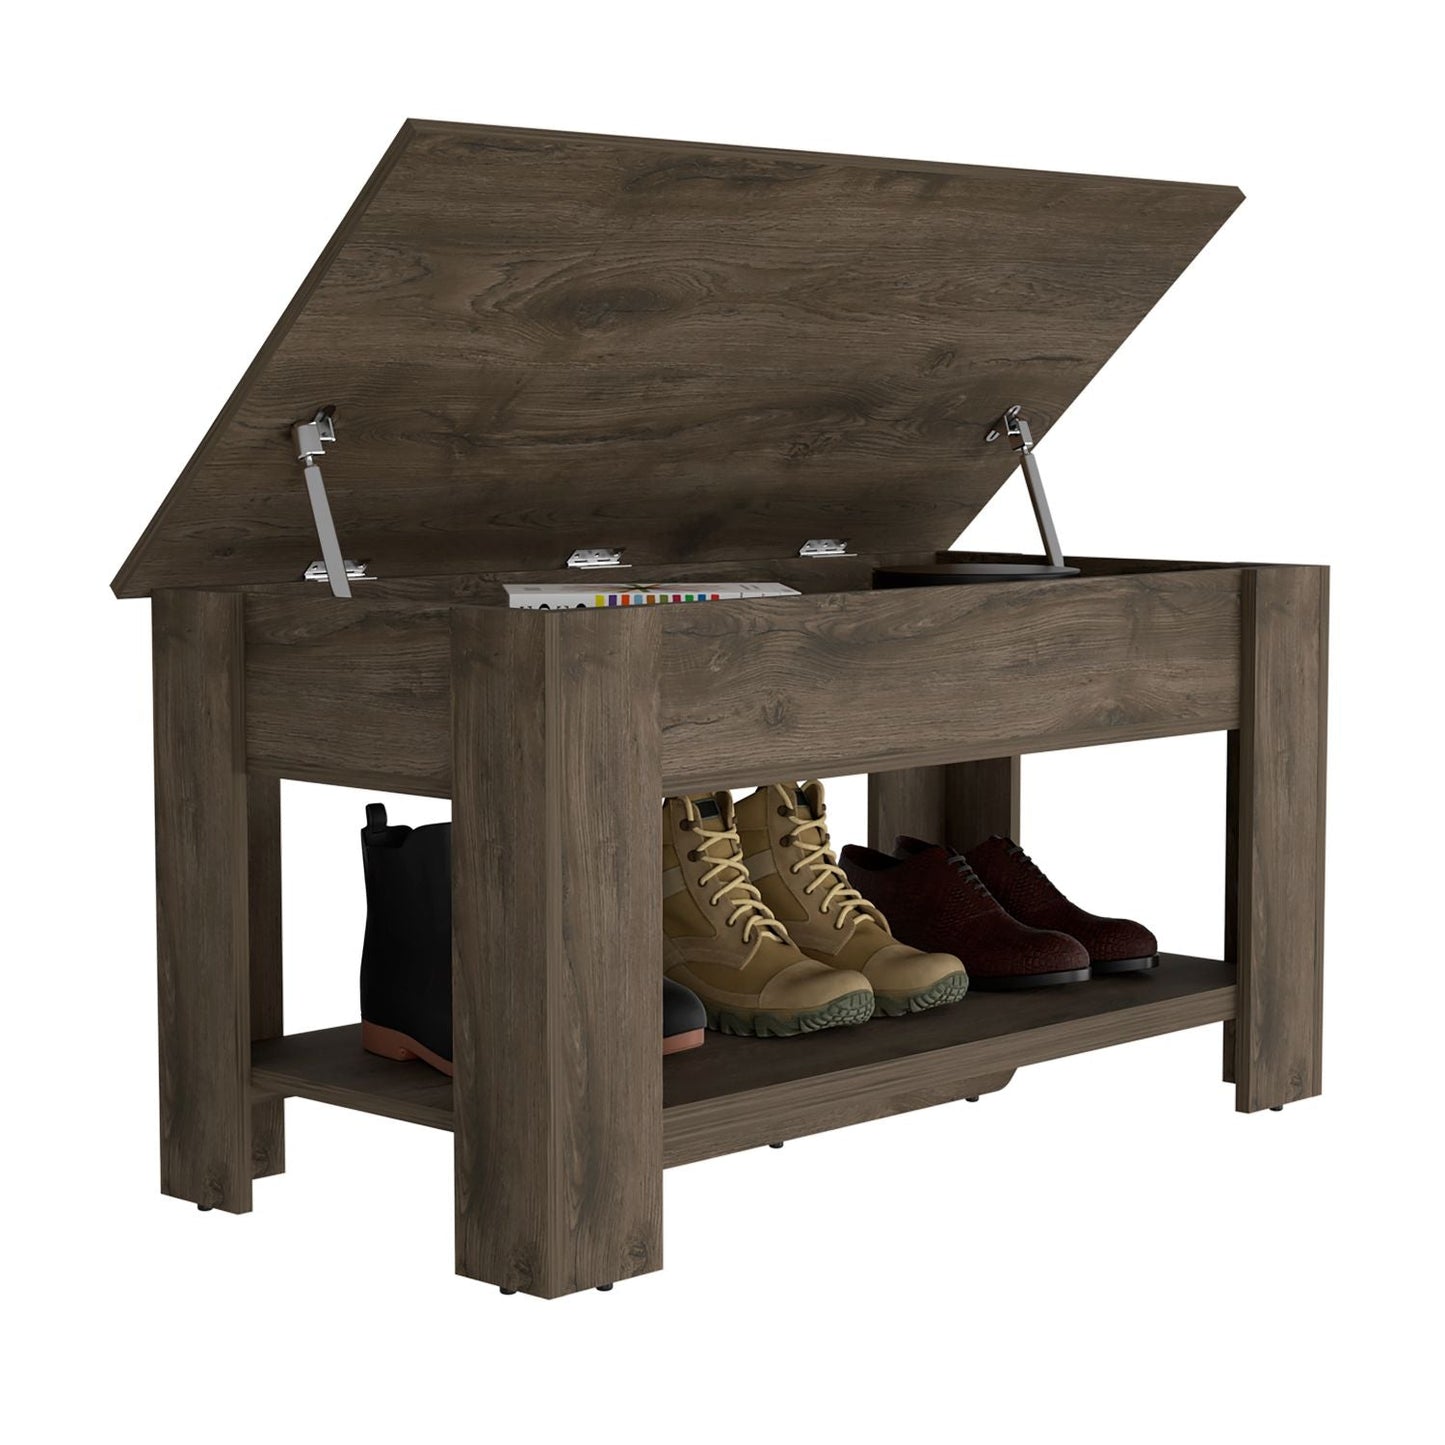 Versatile Storage Table with Lower Shelf - Stylish Dark Brown Finish for All Your Organizational Needs